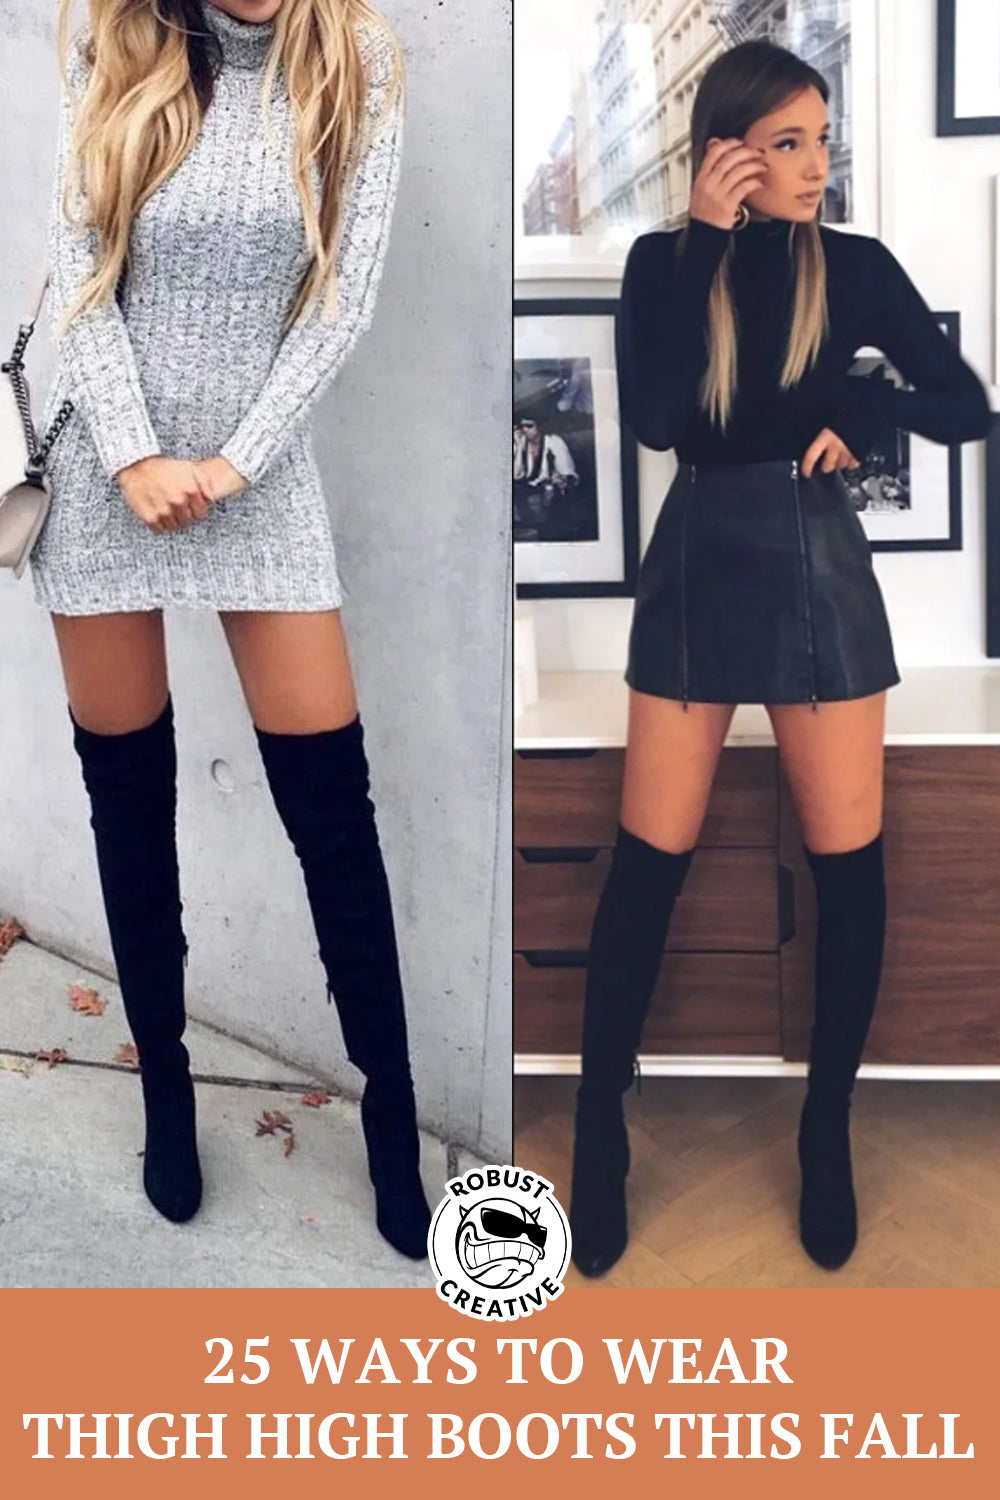 knee high boots and a dress